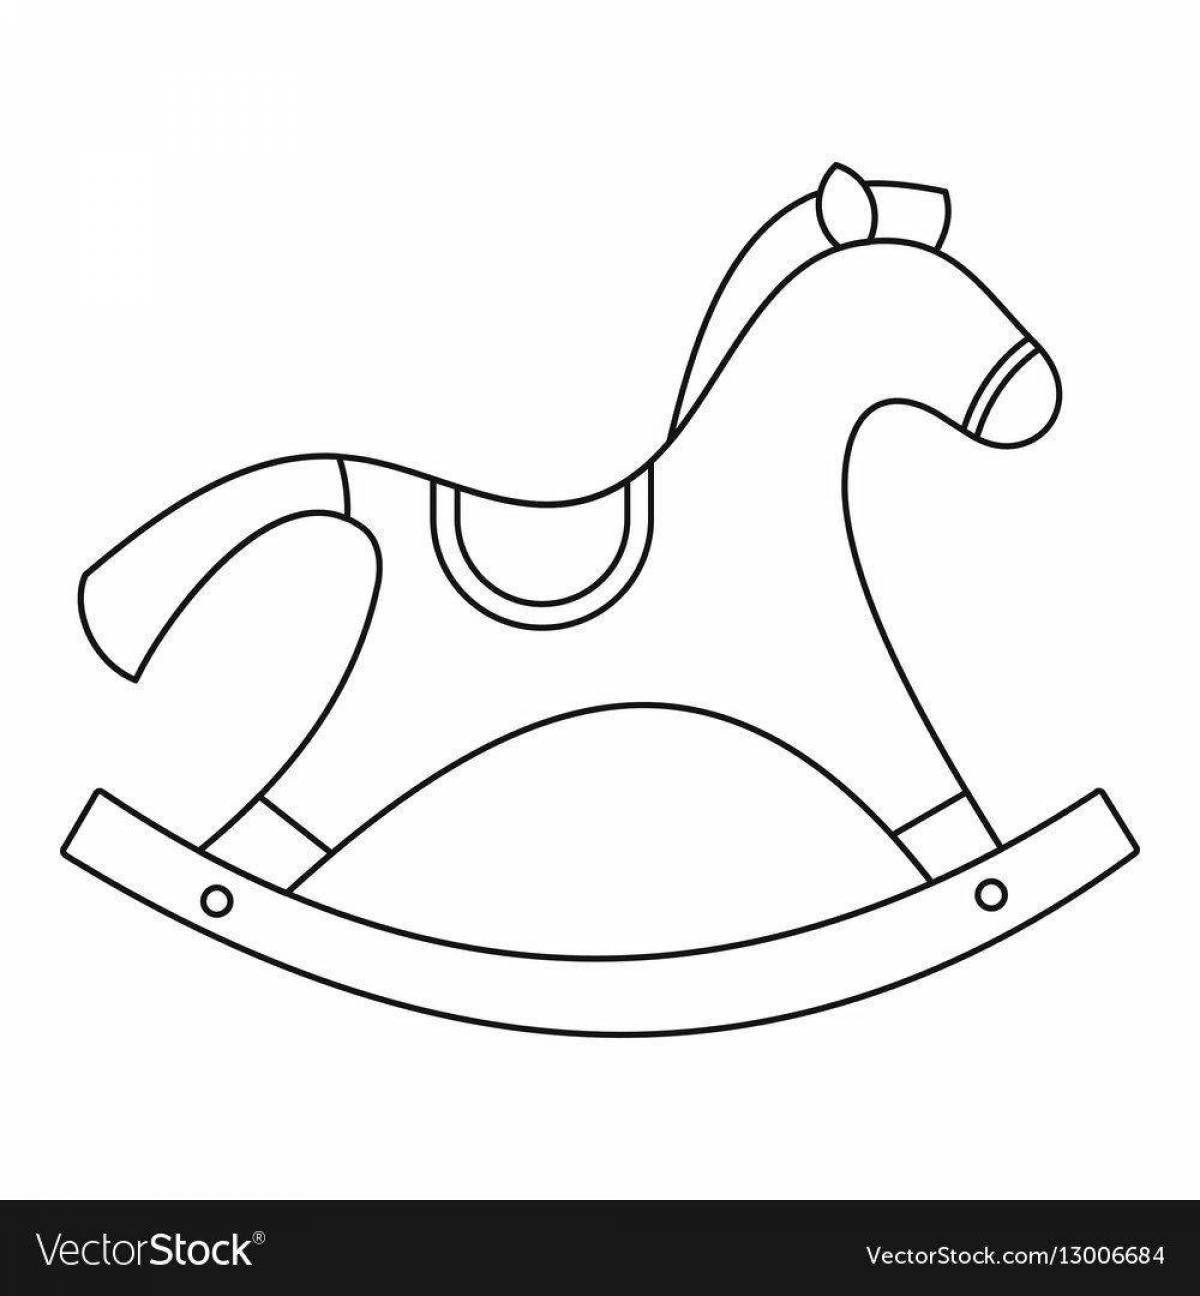 Great Gorodets horse coloring page